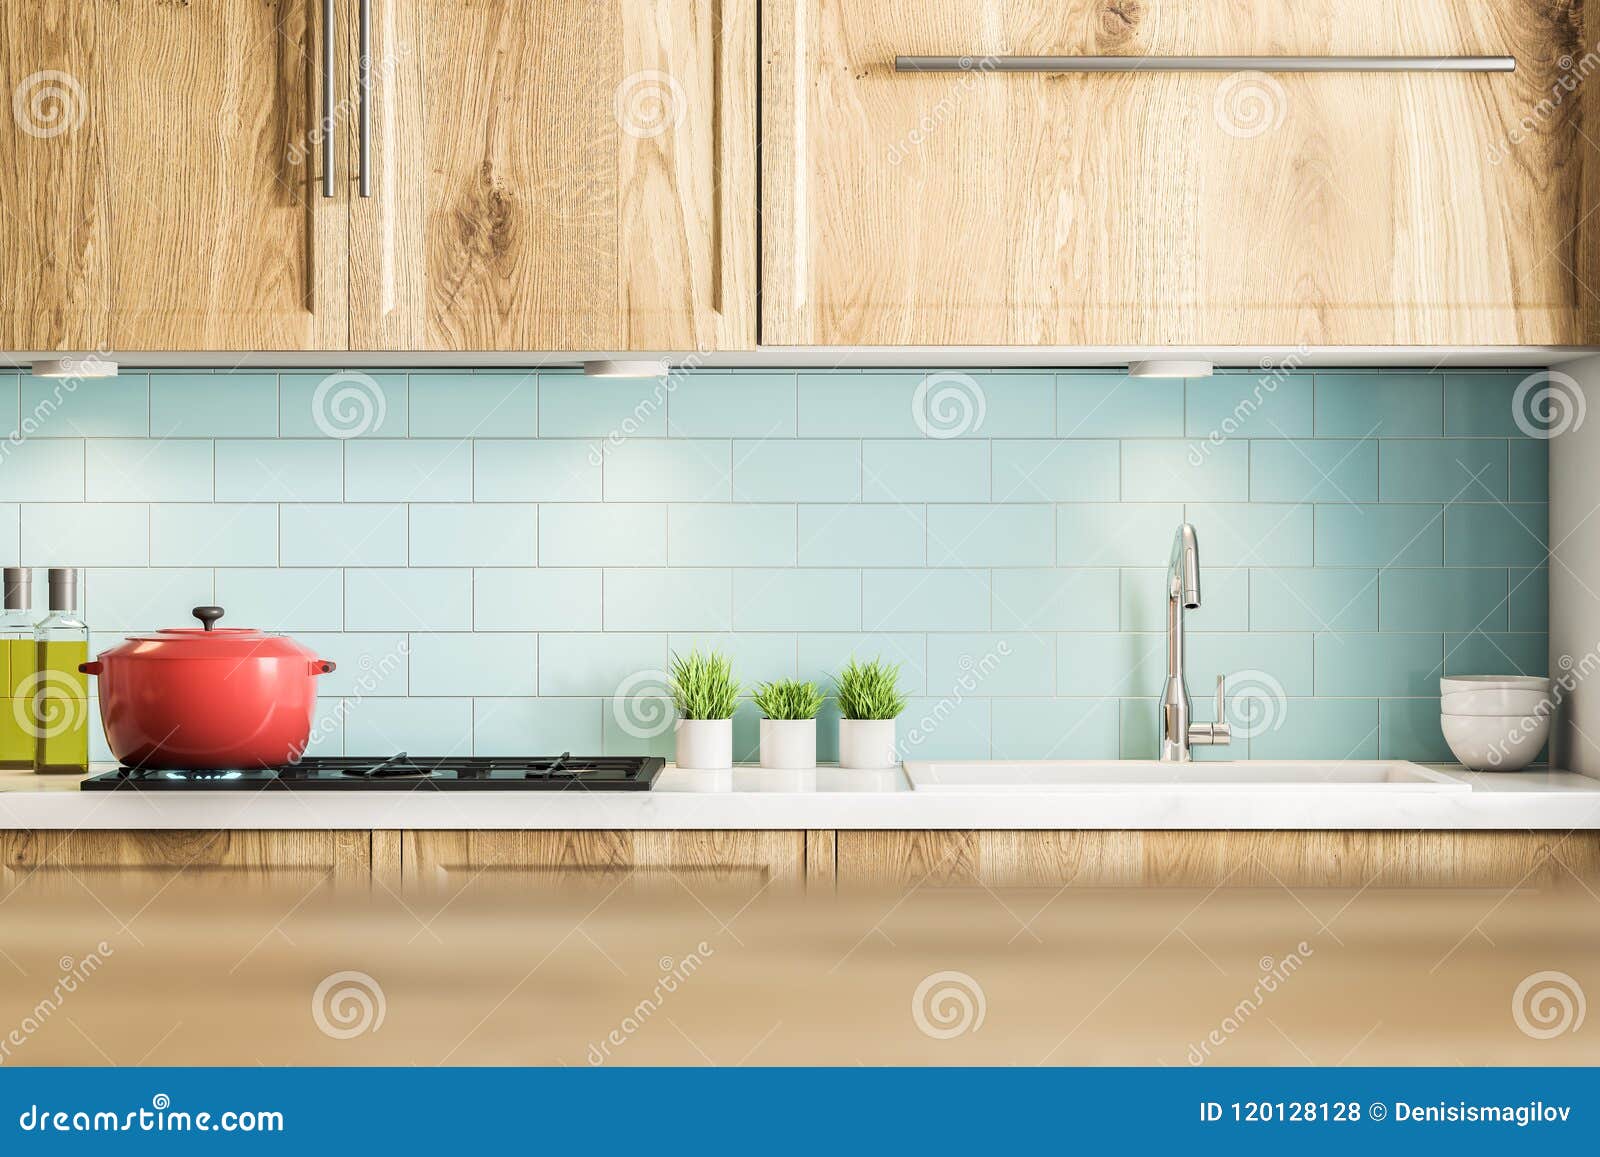 Red Cooking Pot Blue And Wooden Kitchen Countertop Stock